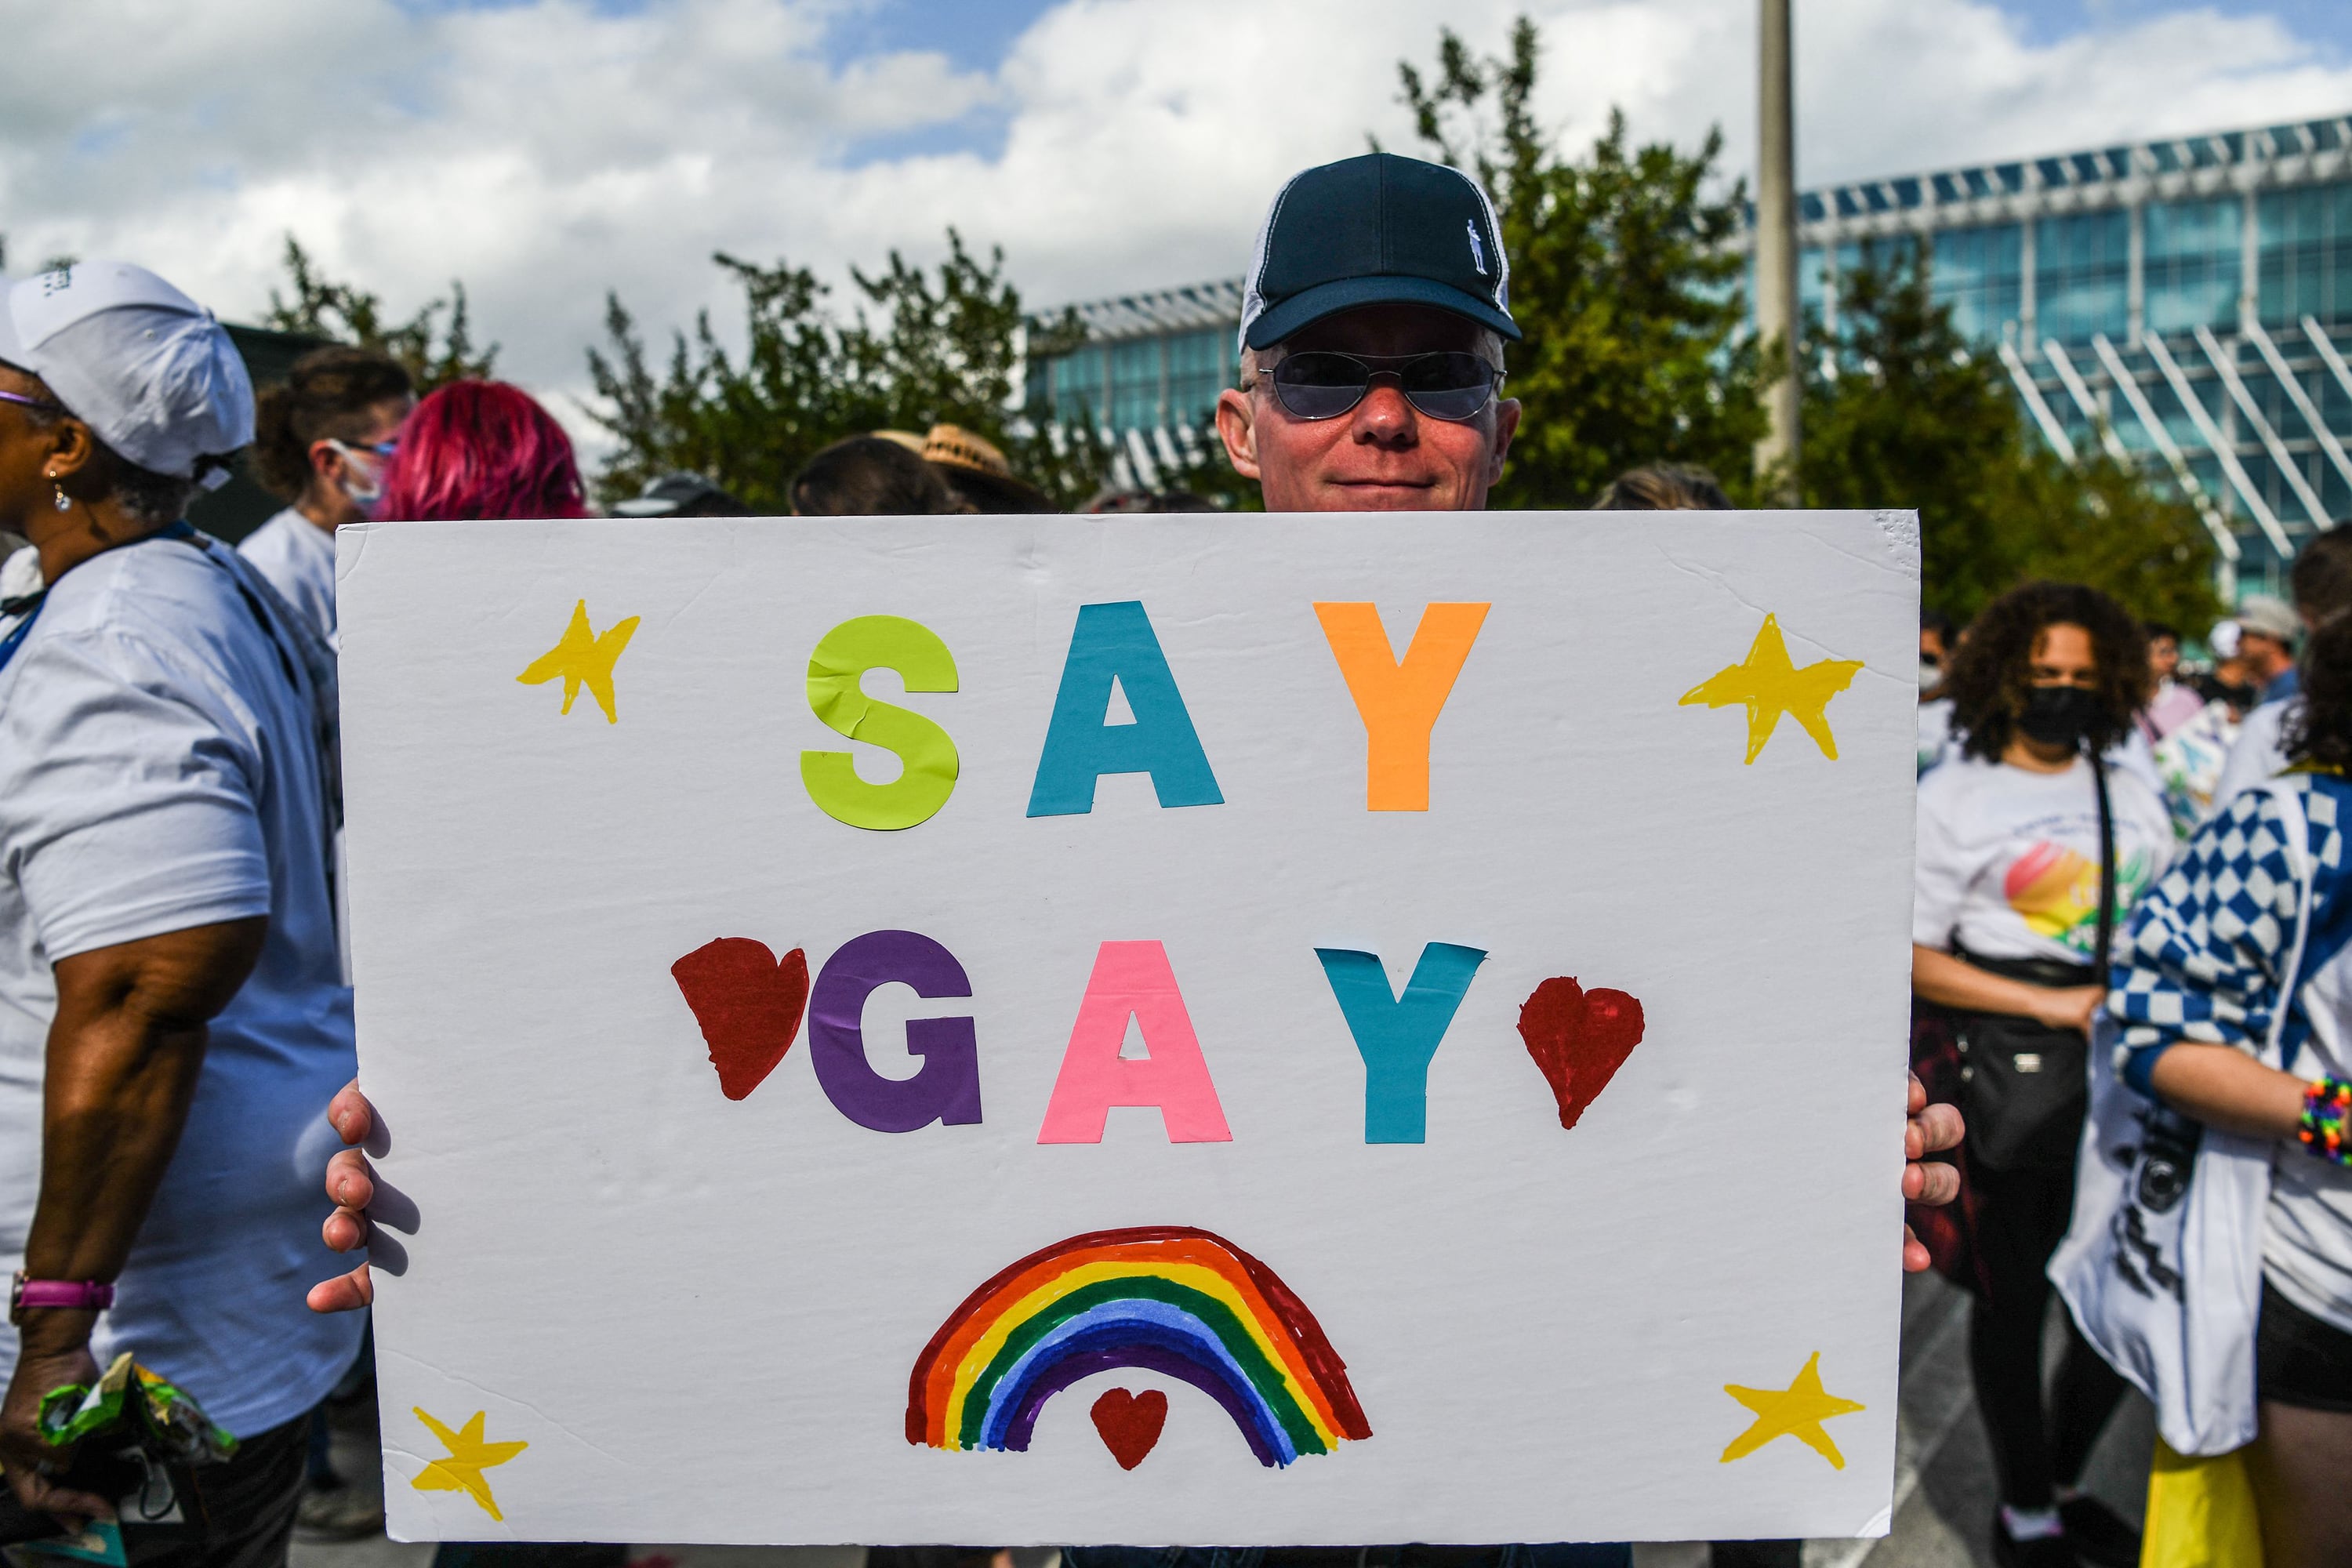 A person wearing a hat and holding a giant white sign with colorful letters that say "SAY GAY" with a rainbow, stars and hearts with people standing in the background.